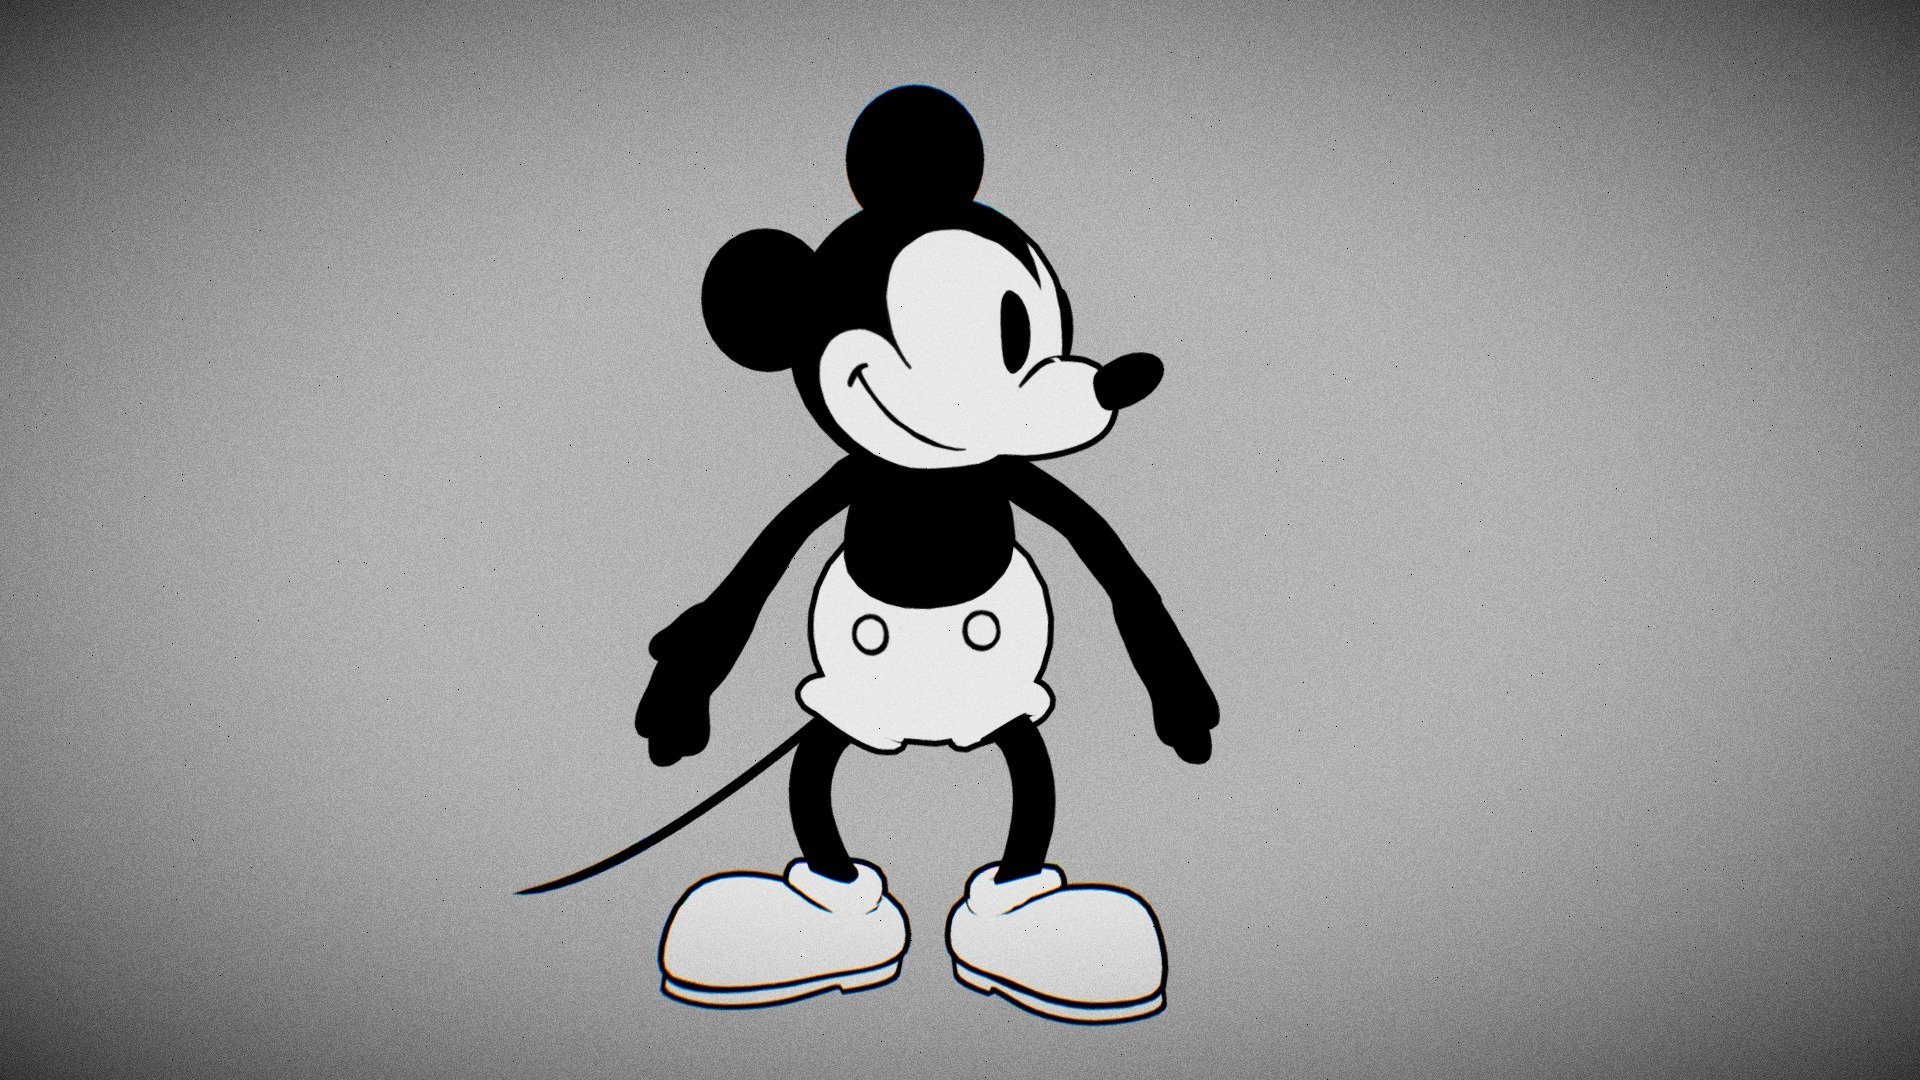 Since Steamboat Willie is in the public domain, I decided to model him and share with everyone! - Steamboat Willie - Download Free 3D model by tramdrey 3d model